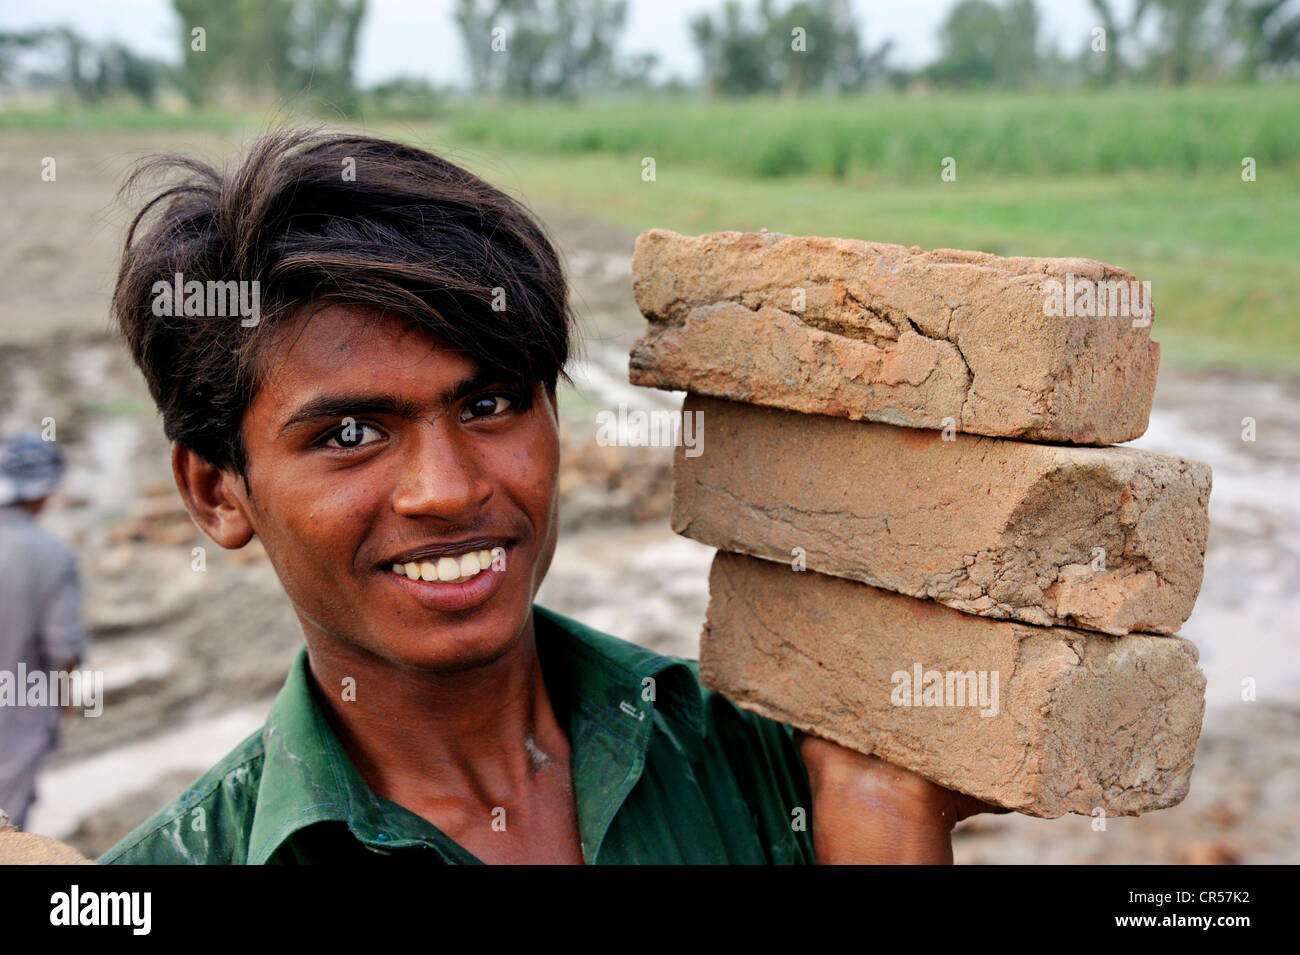 Smiling young man carrying three bricks in one hand, construction site of an irrigation canal, Basti Lehar Walla village, Punjab Stock Photo